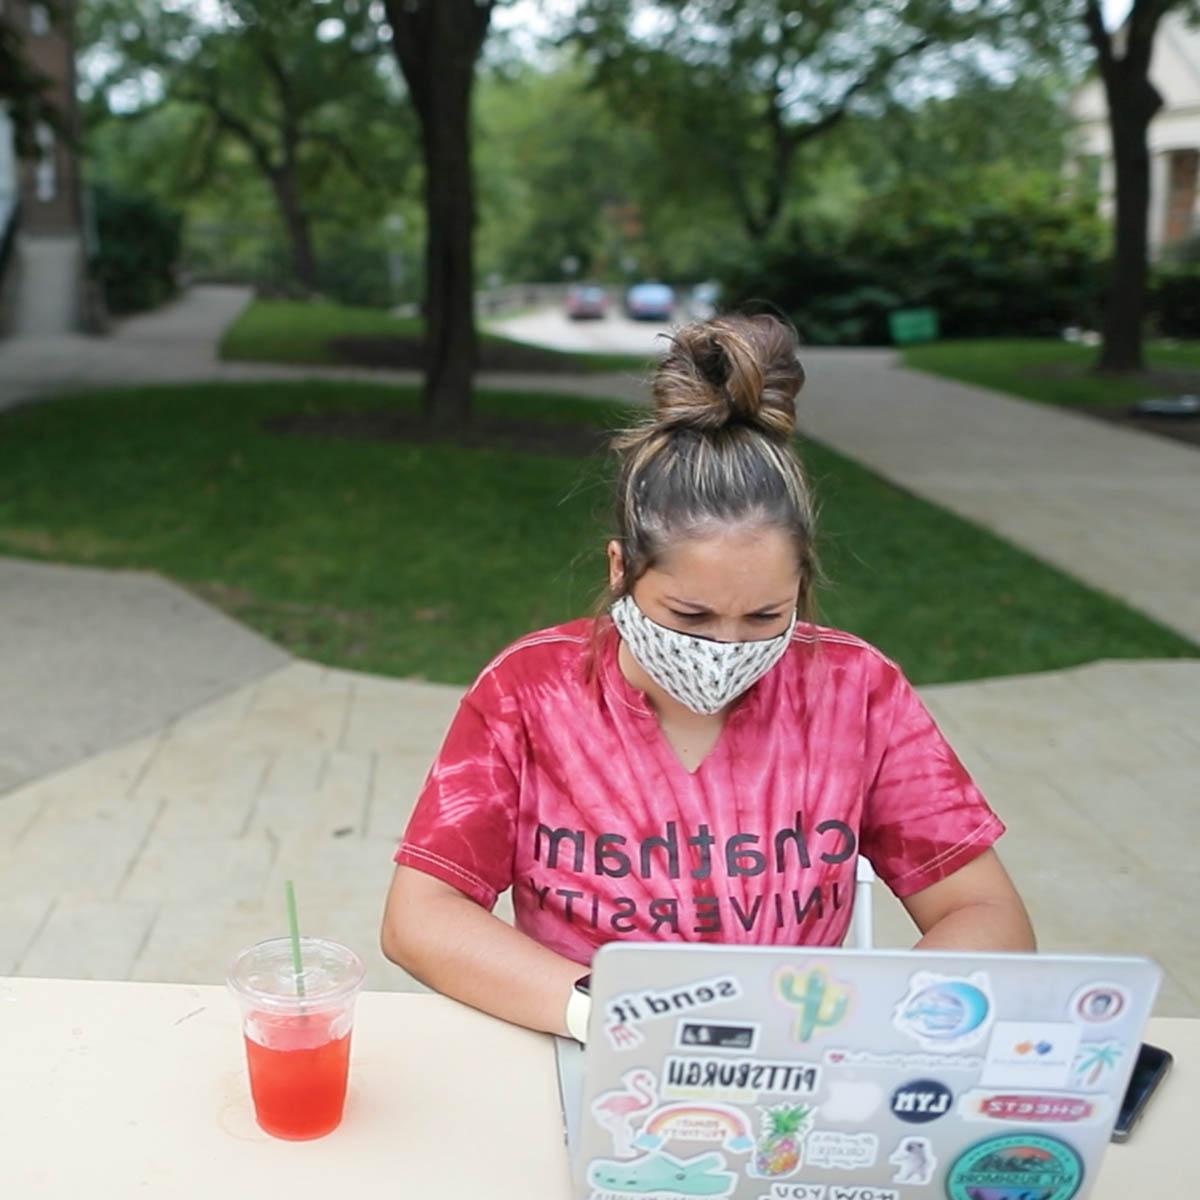 Photo of a young female student in a tie dye Chatham University shirt, wearing a mask and seated at a table in the quad on Shadyside Campus